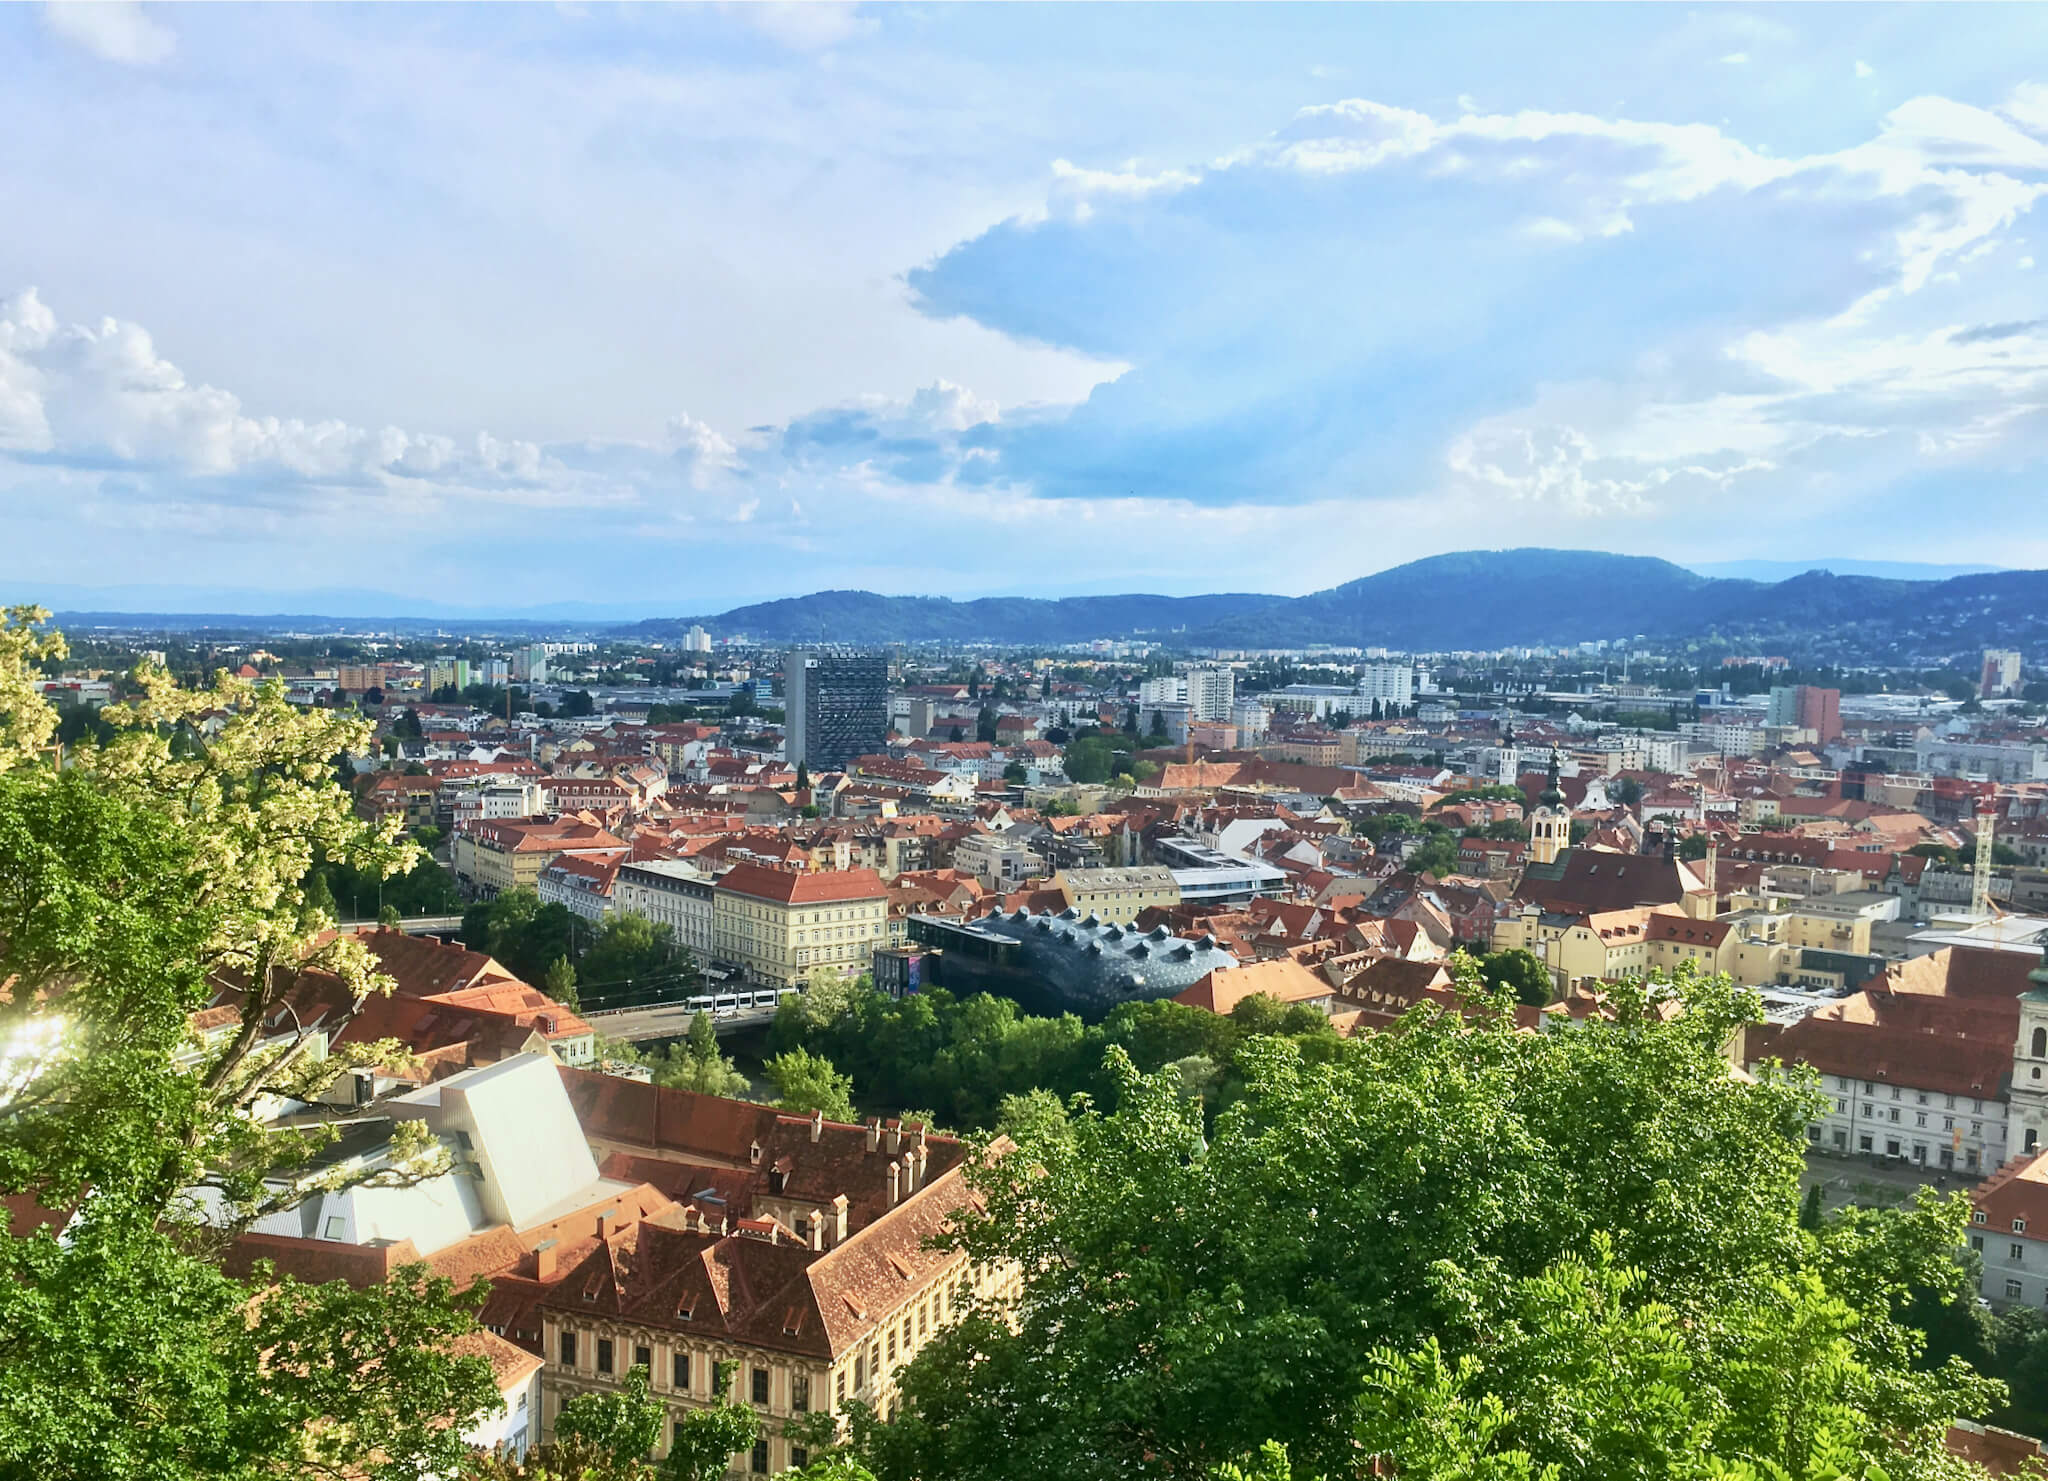 Forget the 48-hour city break! Stay longer to enjoy these great things to do in Graz